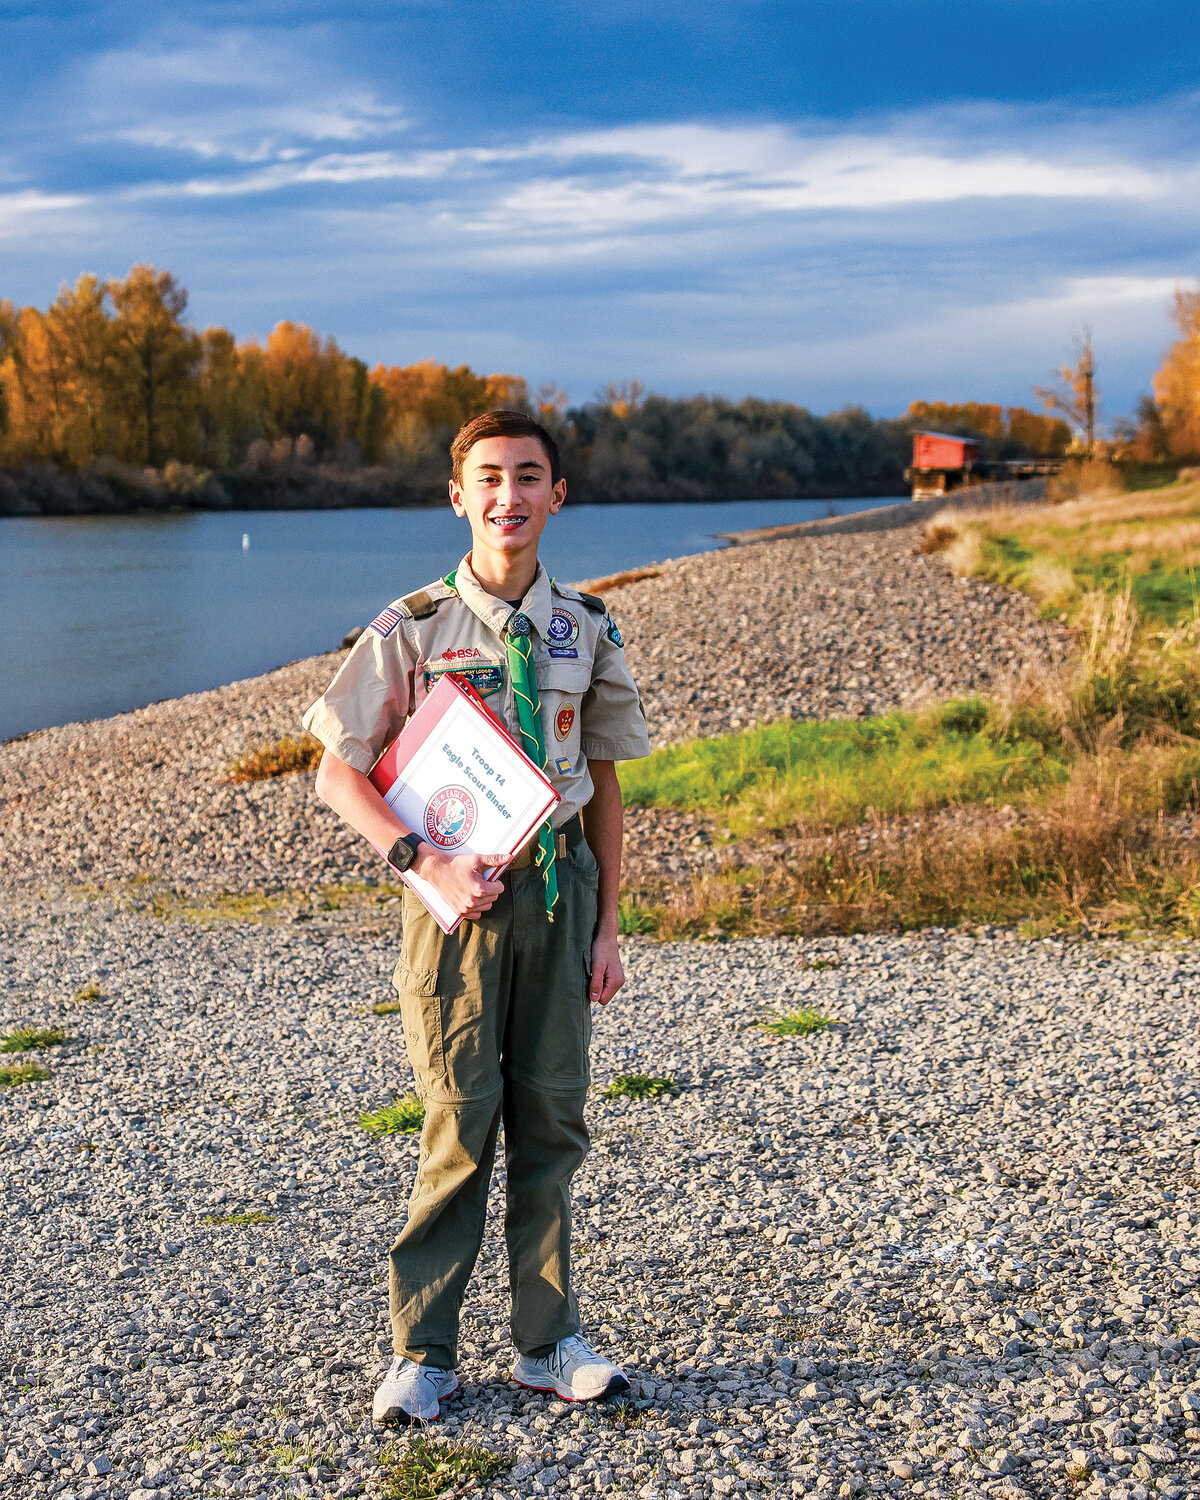 Christian Stiever, assistant senior patrol leader with Boy Scout Troop 14, will be working on his Eagle Scout project by reporting the abandoned boats he sees along the Lake River and beyond to the Port of Ridgefield in April 2024.